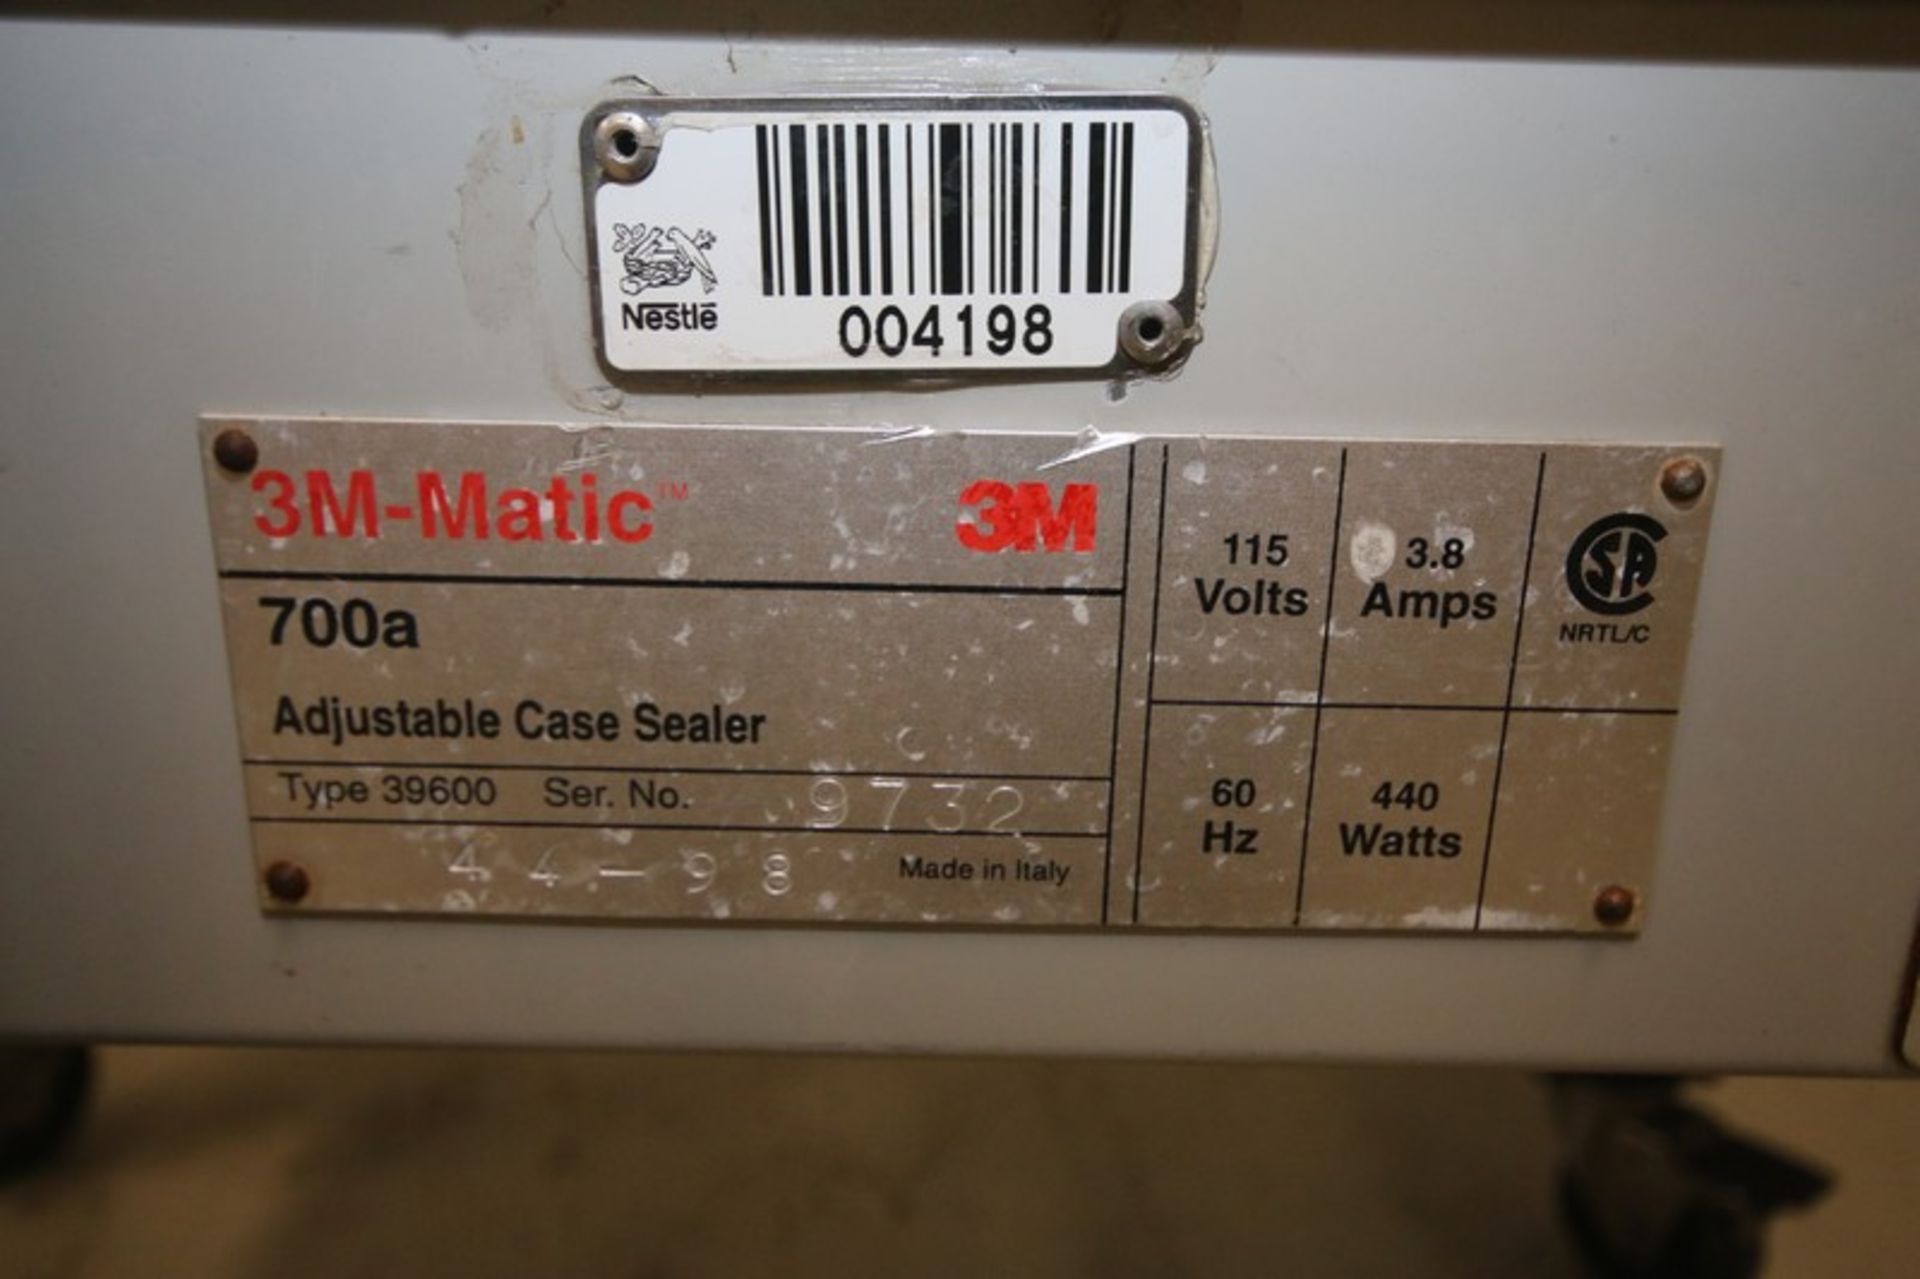 3M-Matic Adjustable Case Sealer, Series 700A, Type: 39600, SN 9732, Includes Top & Bottom Cartridge, - Image 5 of 6